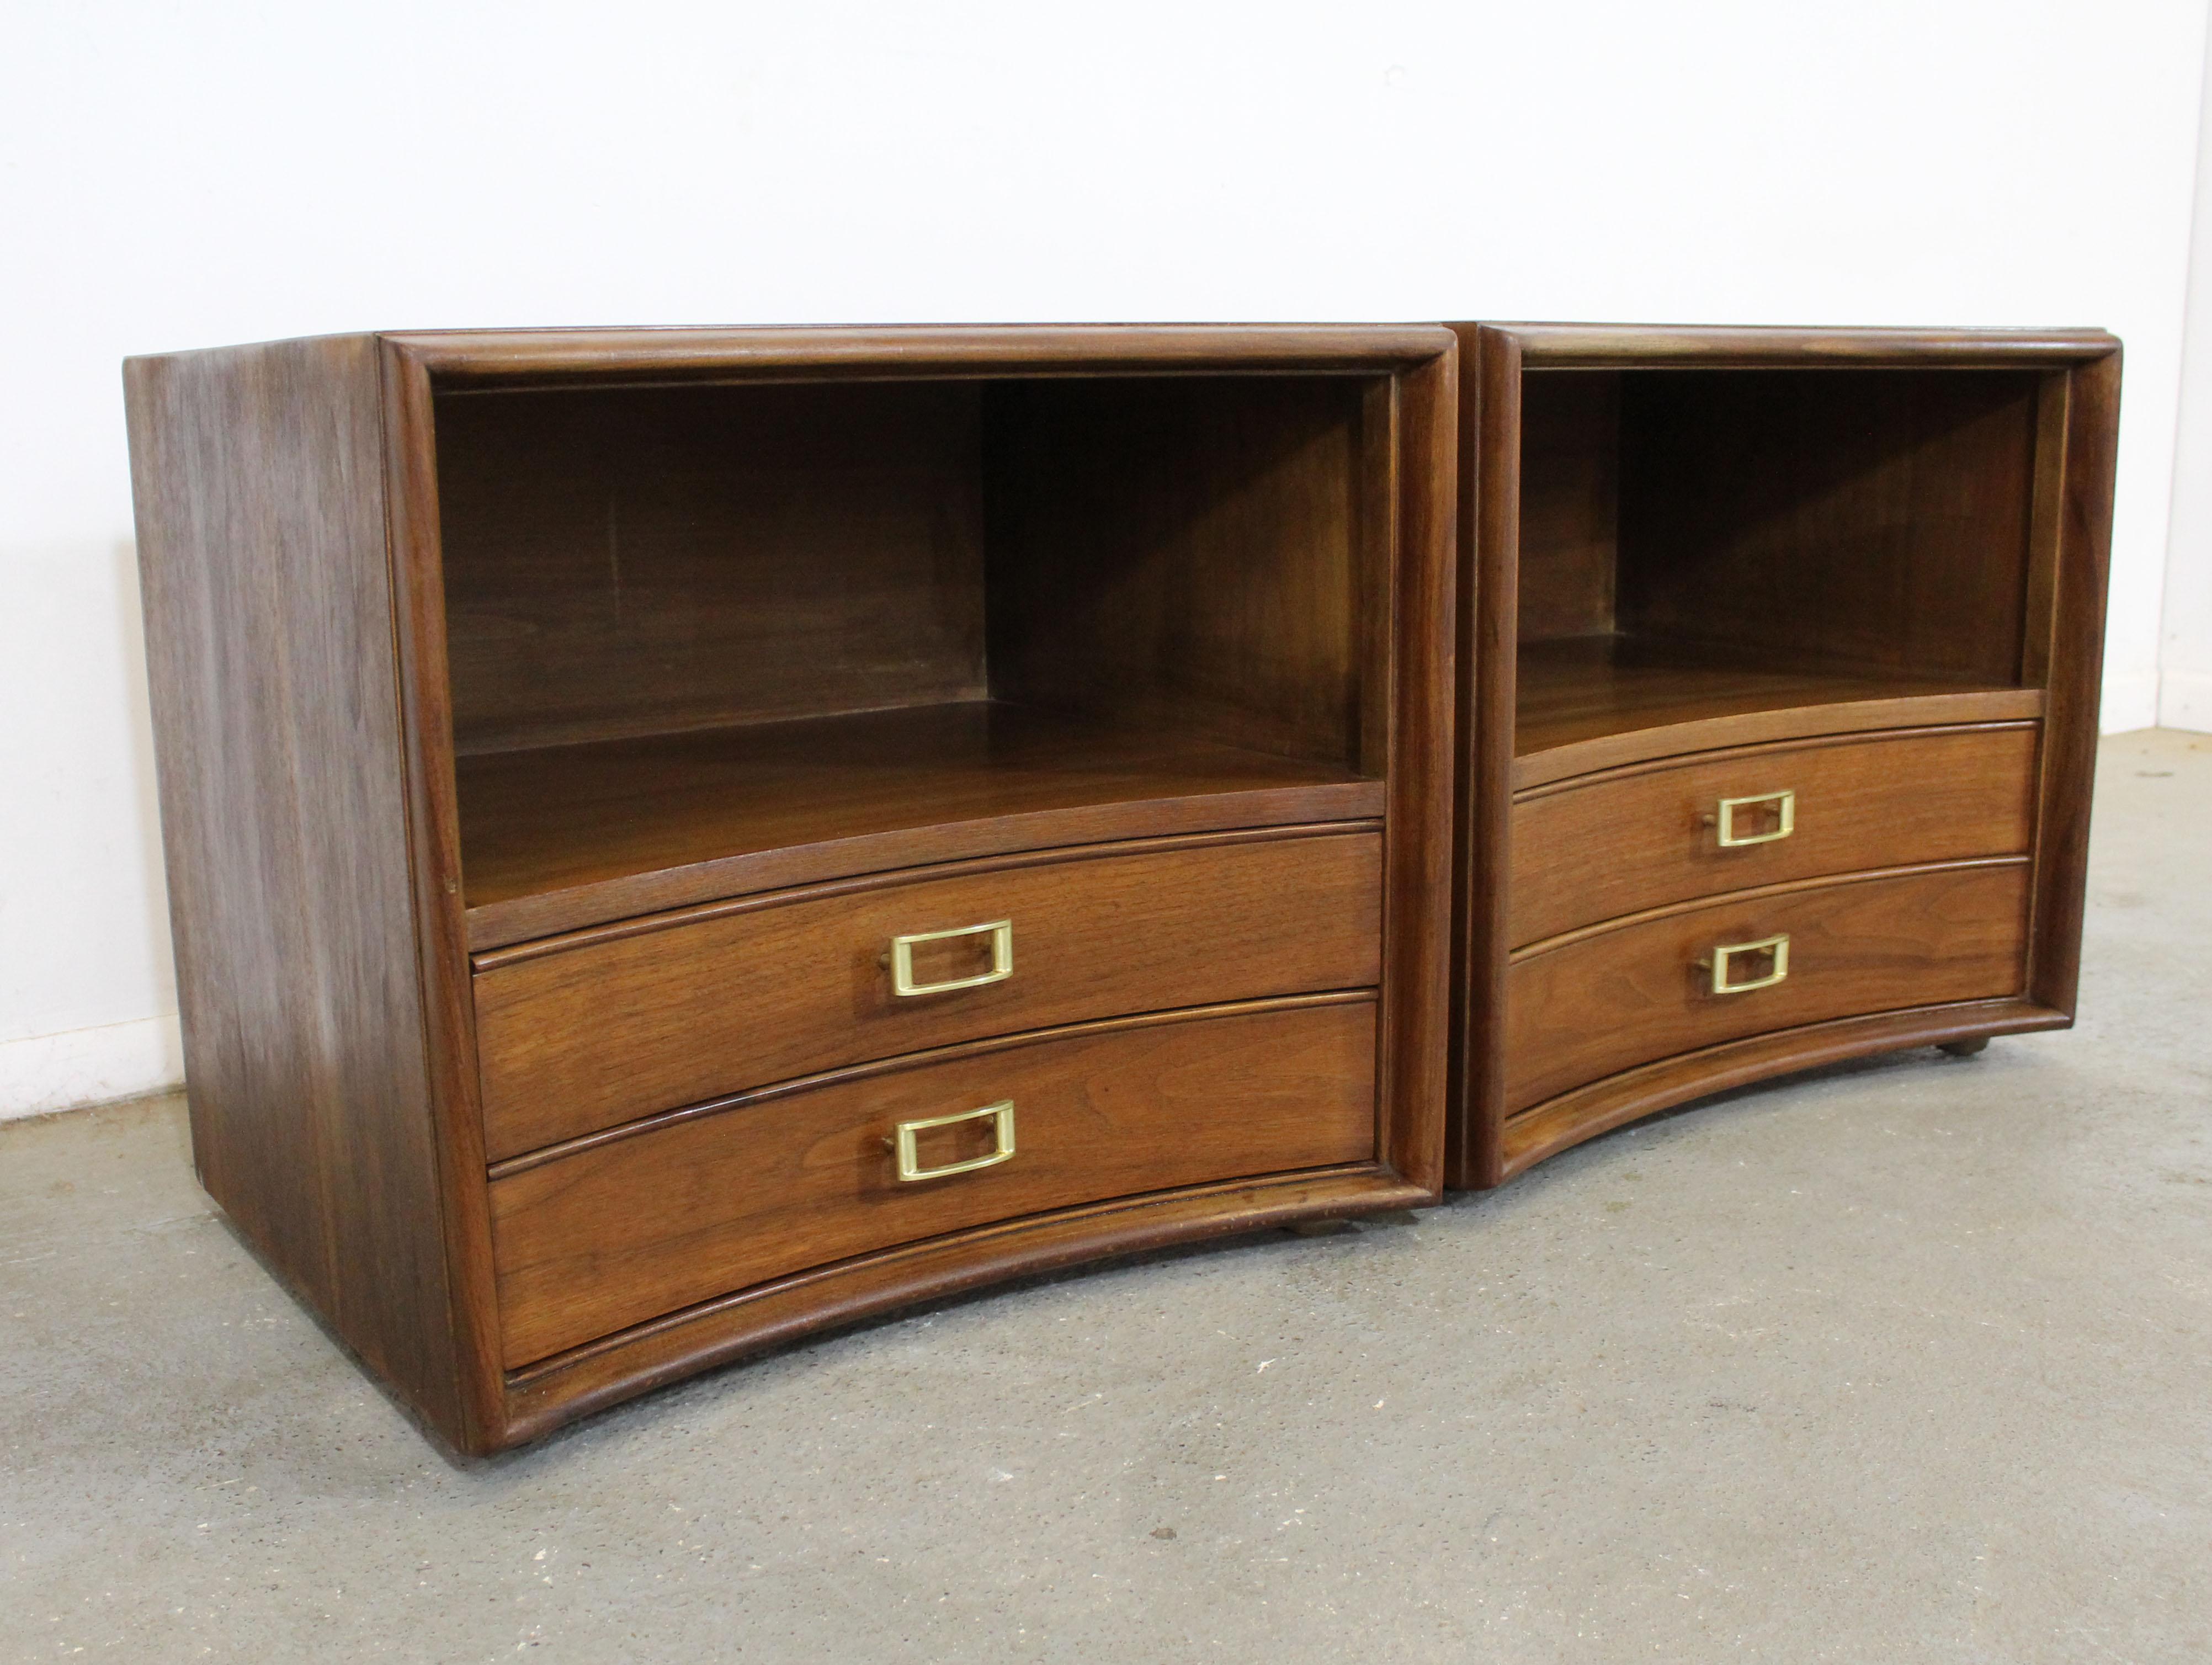 American Pair of Mid-Century Modern Paul Frankl Johnson 'Emissary' Curved Nightstands